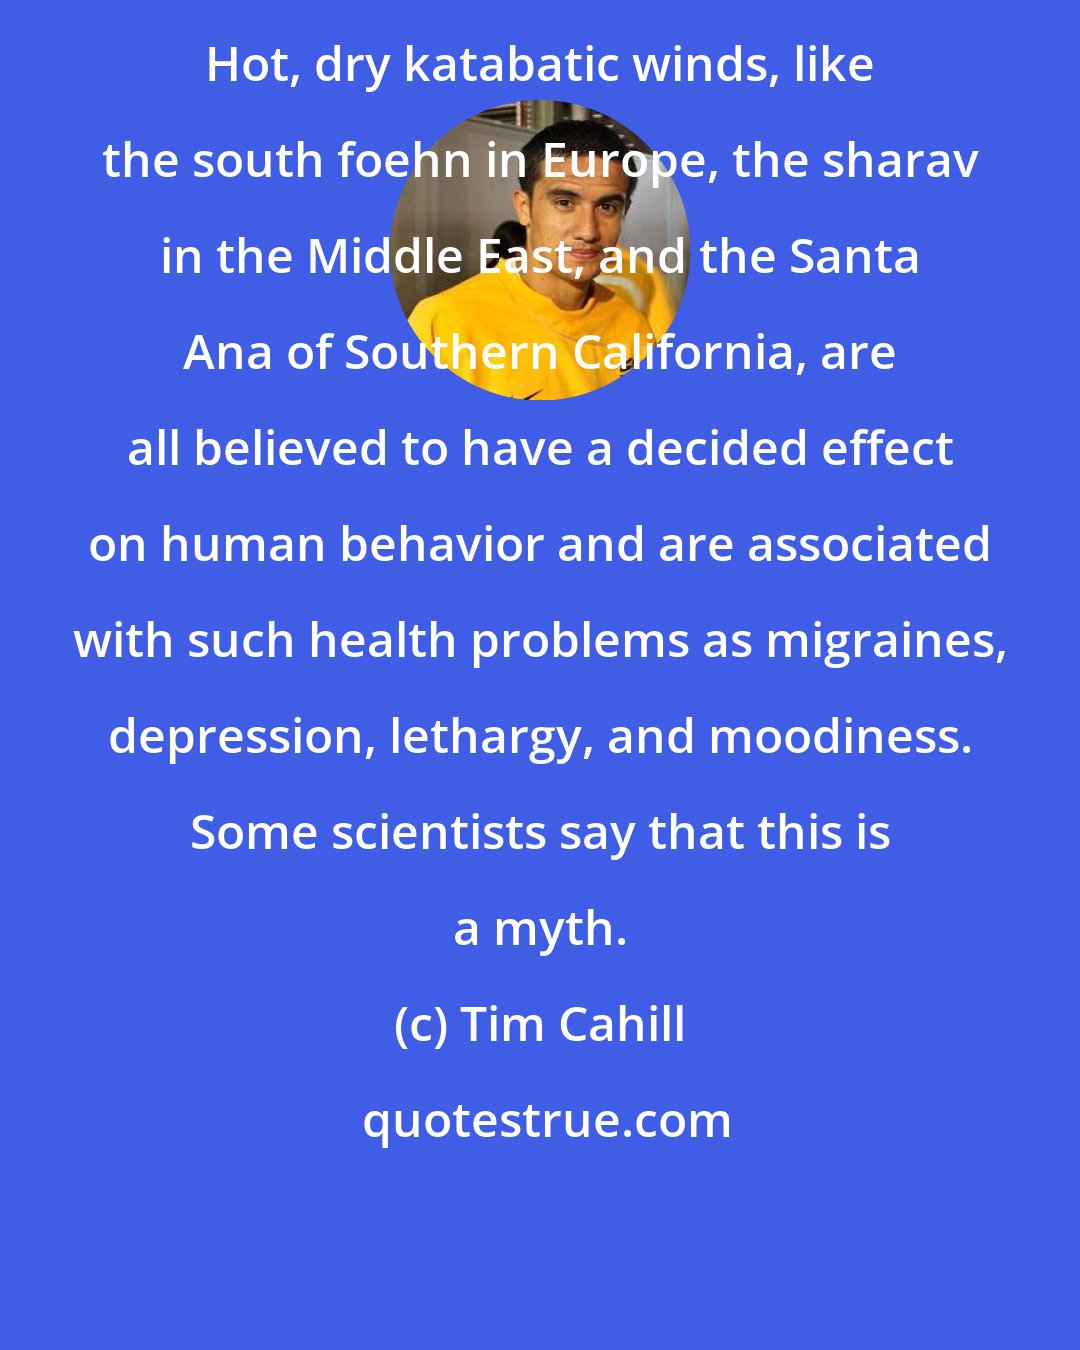 Tim Cahill: Hot, dry katabatic winds, like the south foehn in Europe, the sharav in the Middle East, and the Santa Ana of Southern California, are all believed to have a decided effect on human behavior and are associated with such health problems as migraines, depression, lethargy, and moodiness. Some scientists say that this is a myth.